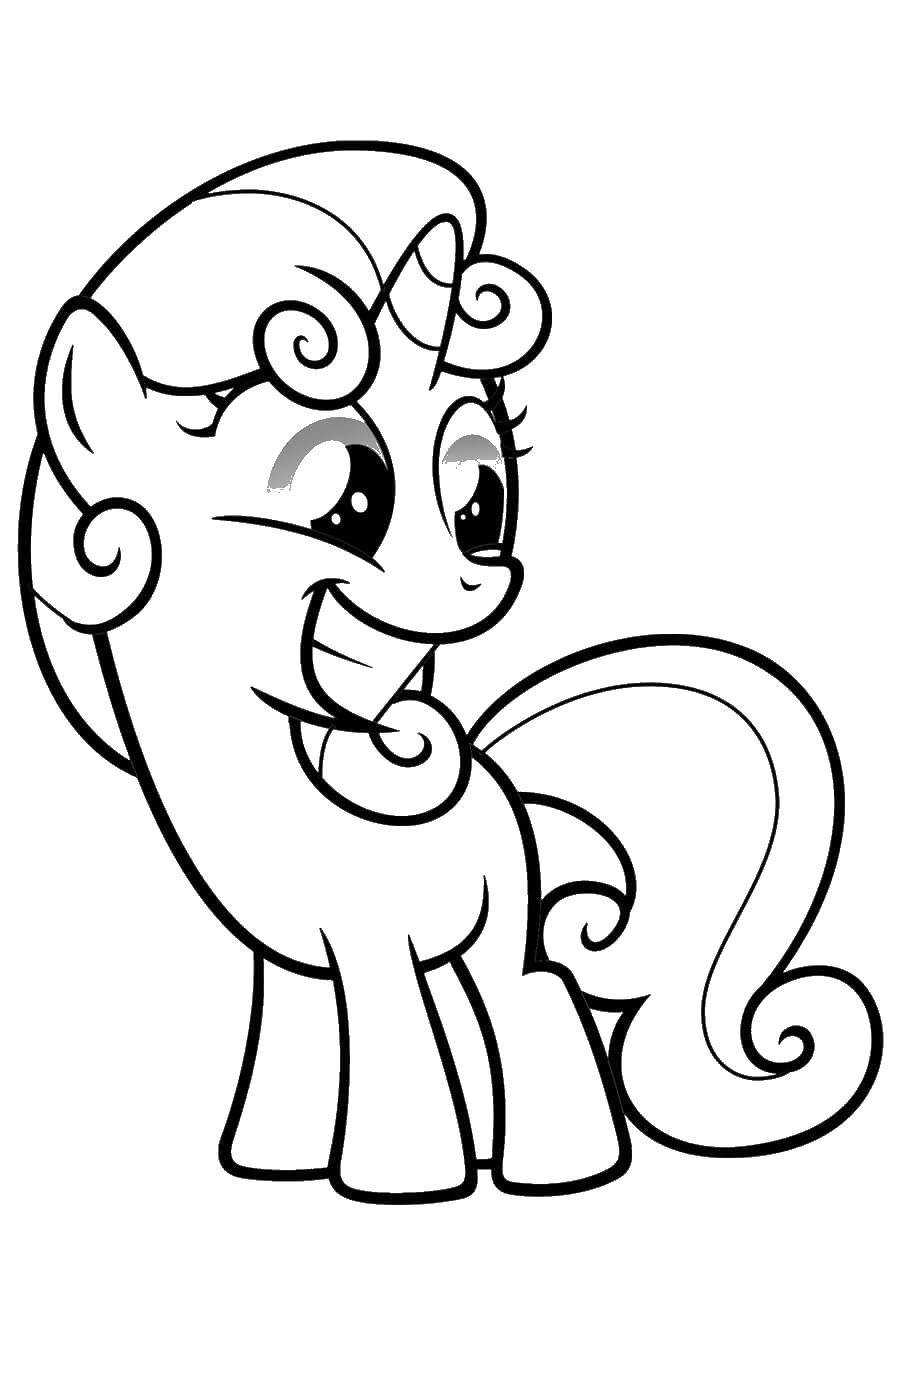 Coloring Happy pony. Category Ponies. Tags:  Pony, My little pony.